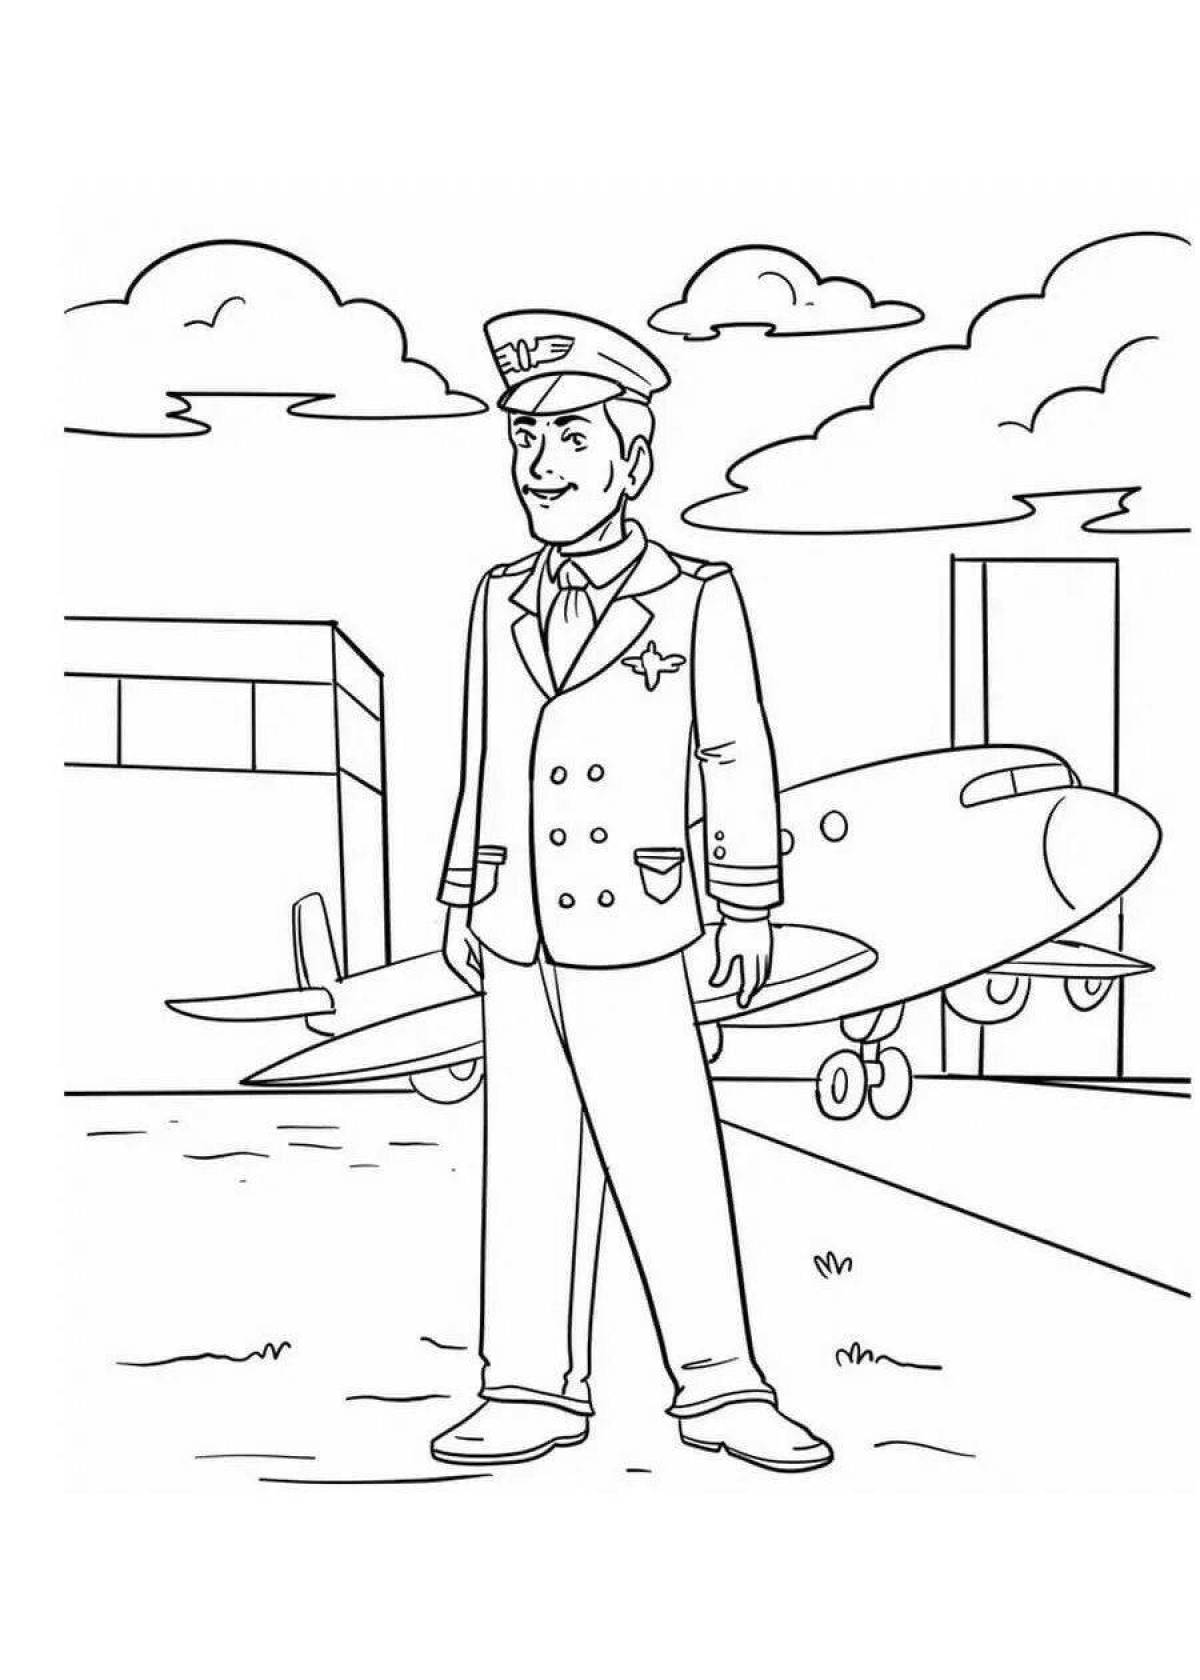 Animated ferry driver coloring book